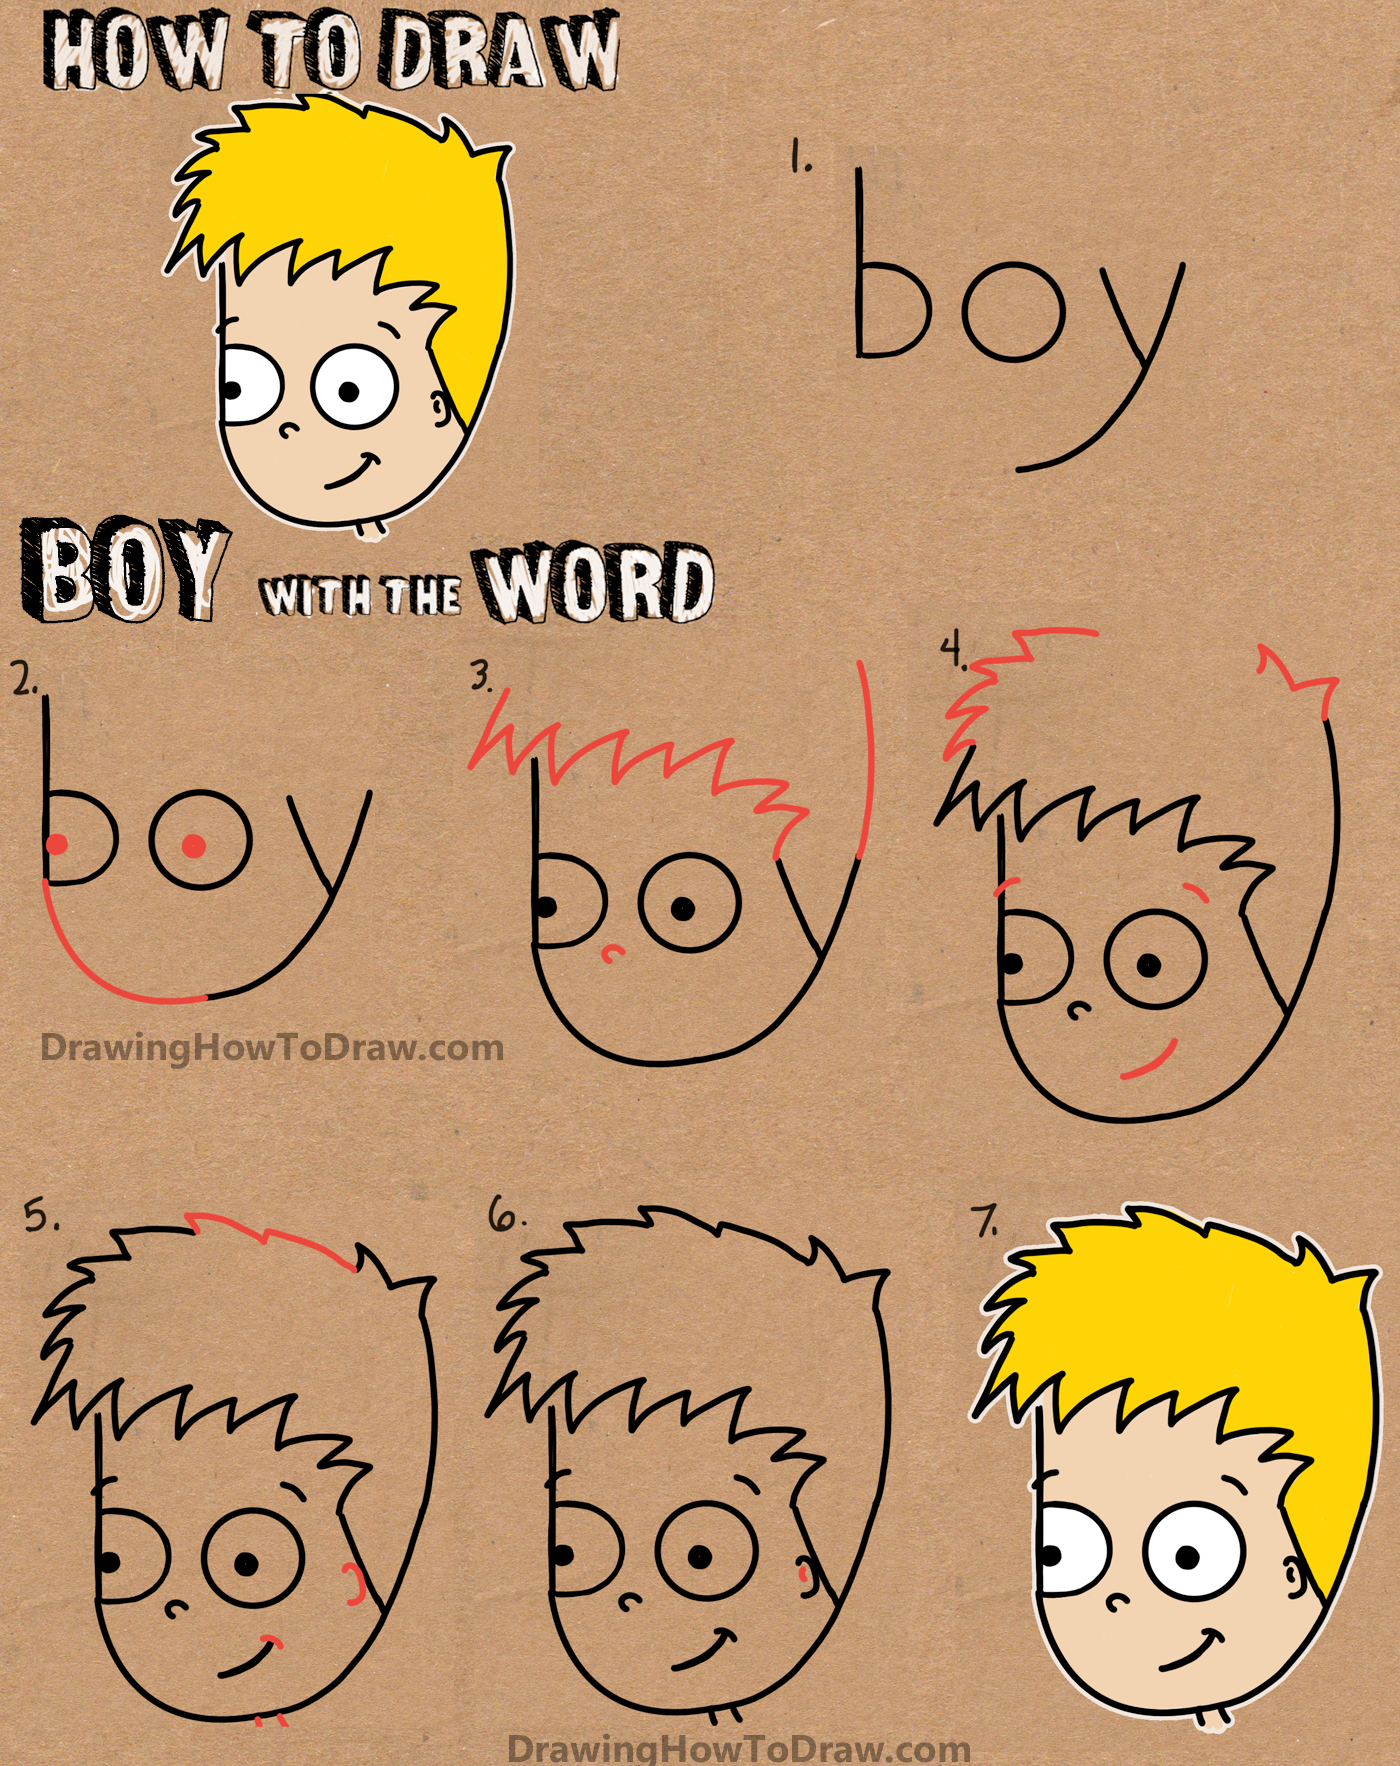 How to Draw a Cartoon Boy with the word Boy Easy Tutorial for Kids